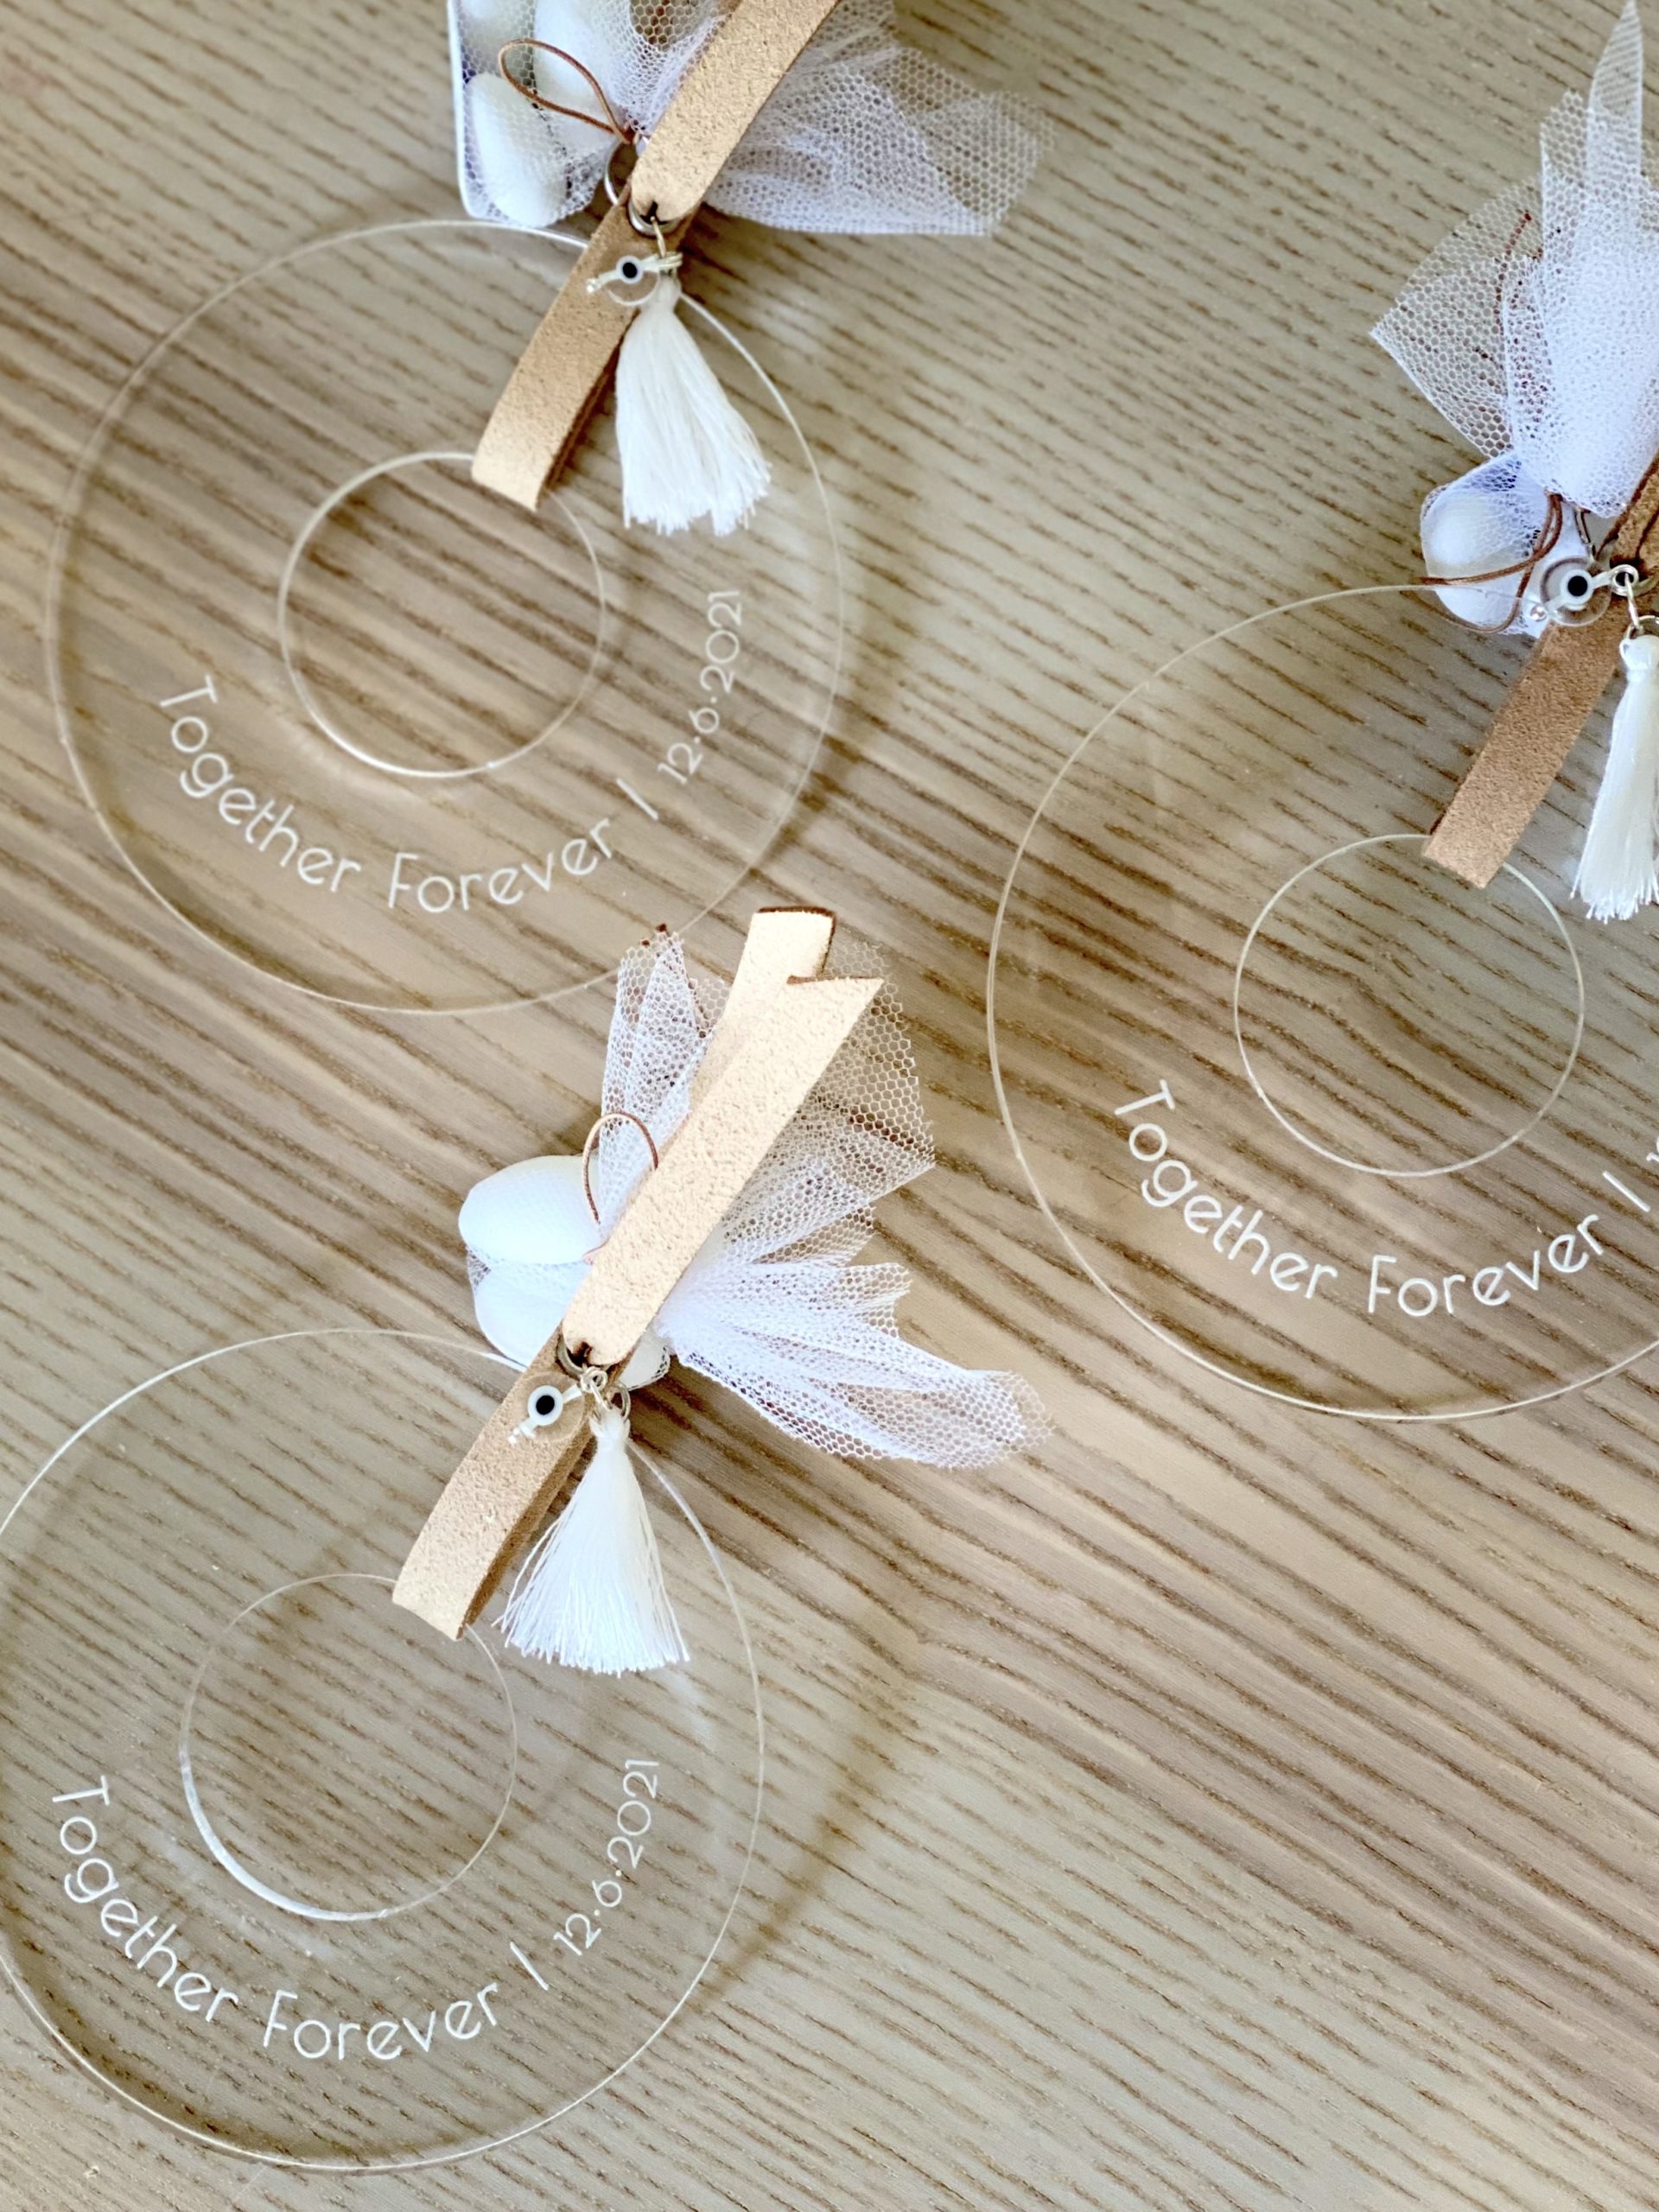 together-forever-wedding-favor-plexiglass-charm-with-names